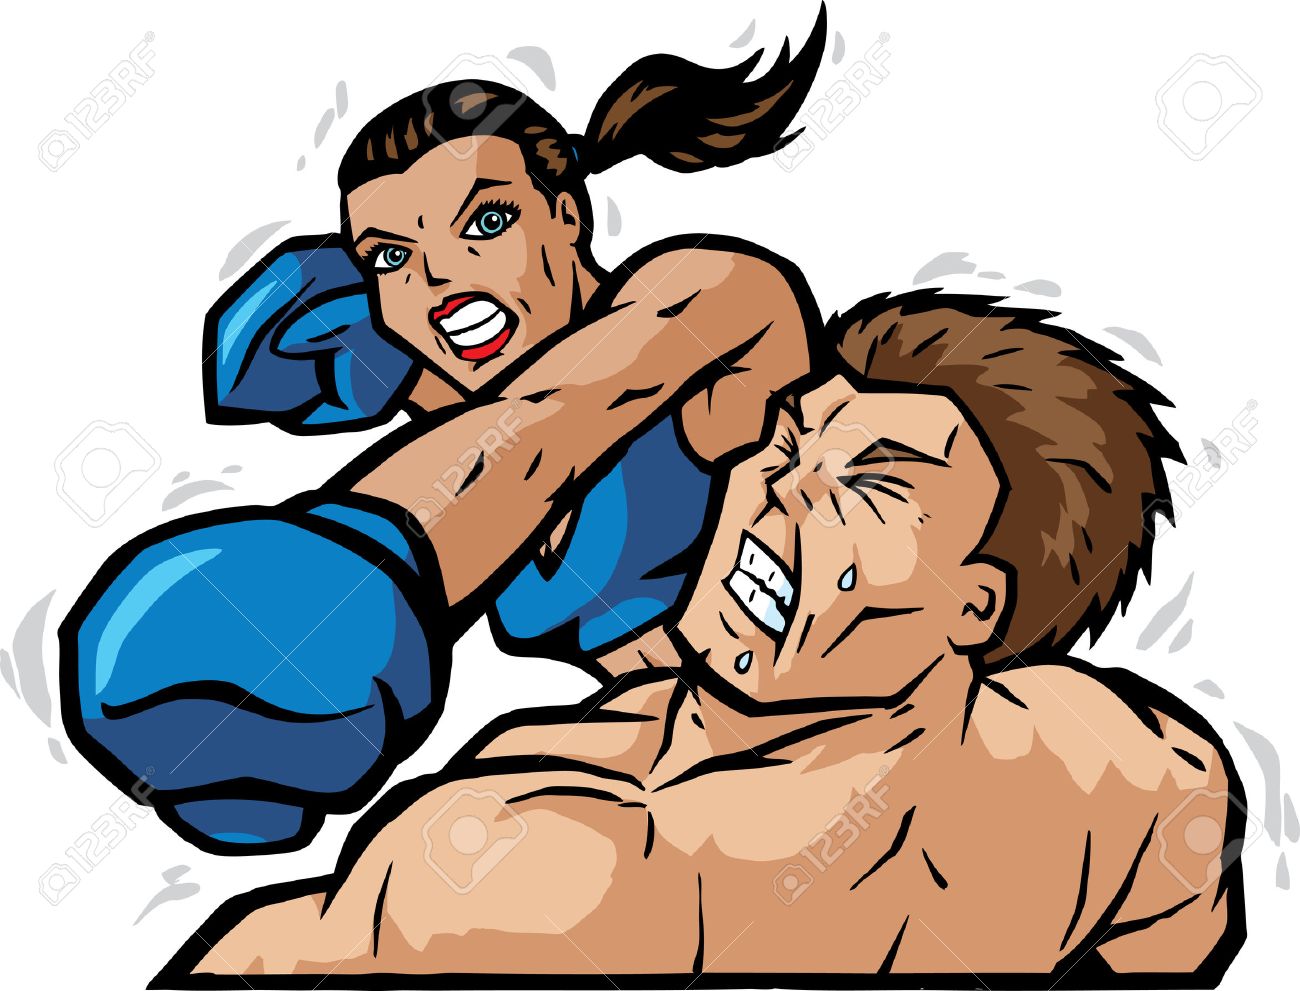 christian alexander recommends girl knocks guy out pic